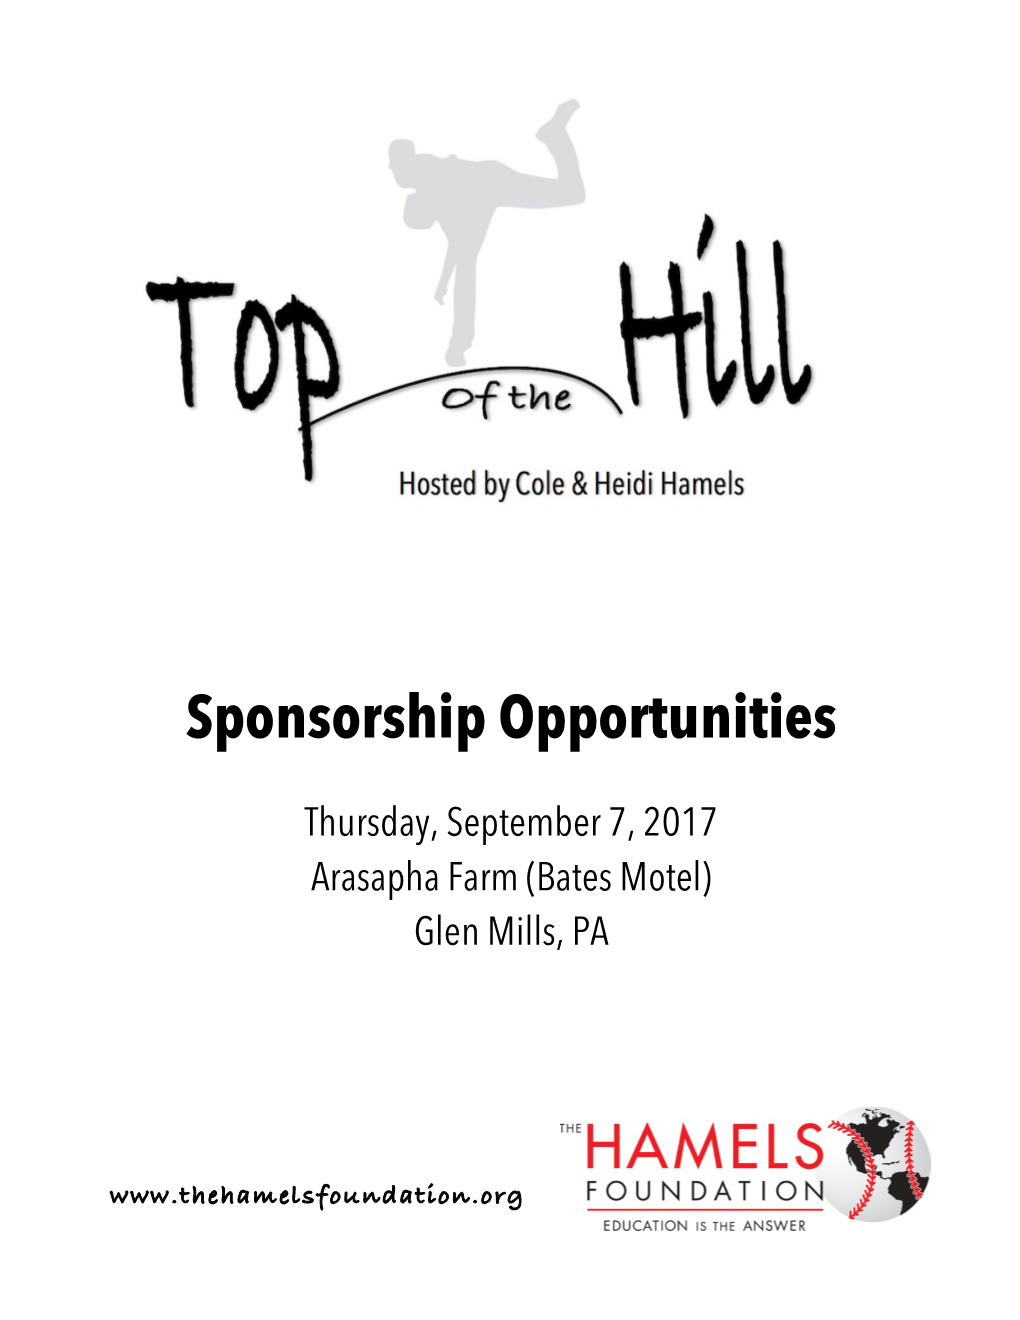 Top of the Hill Sponsorship Packet